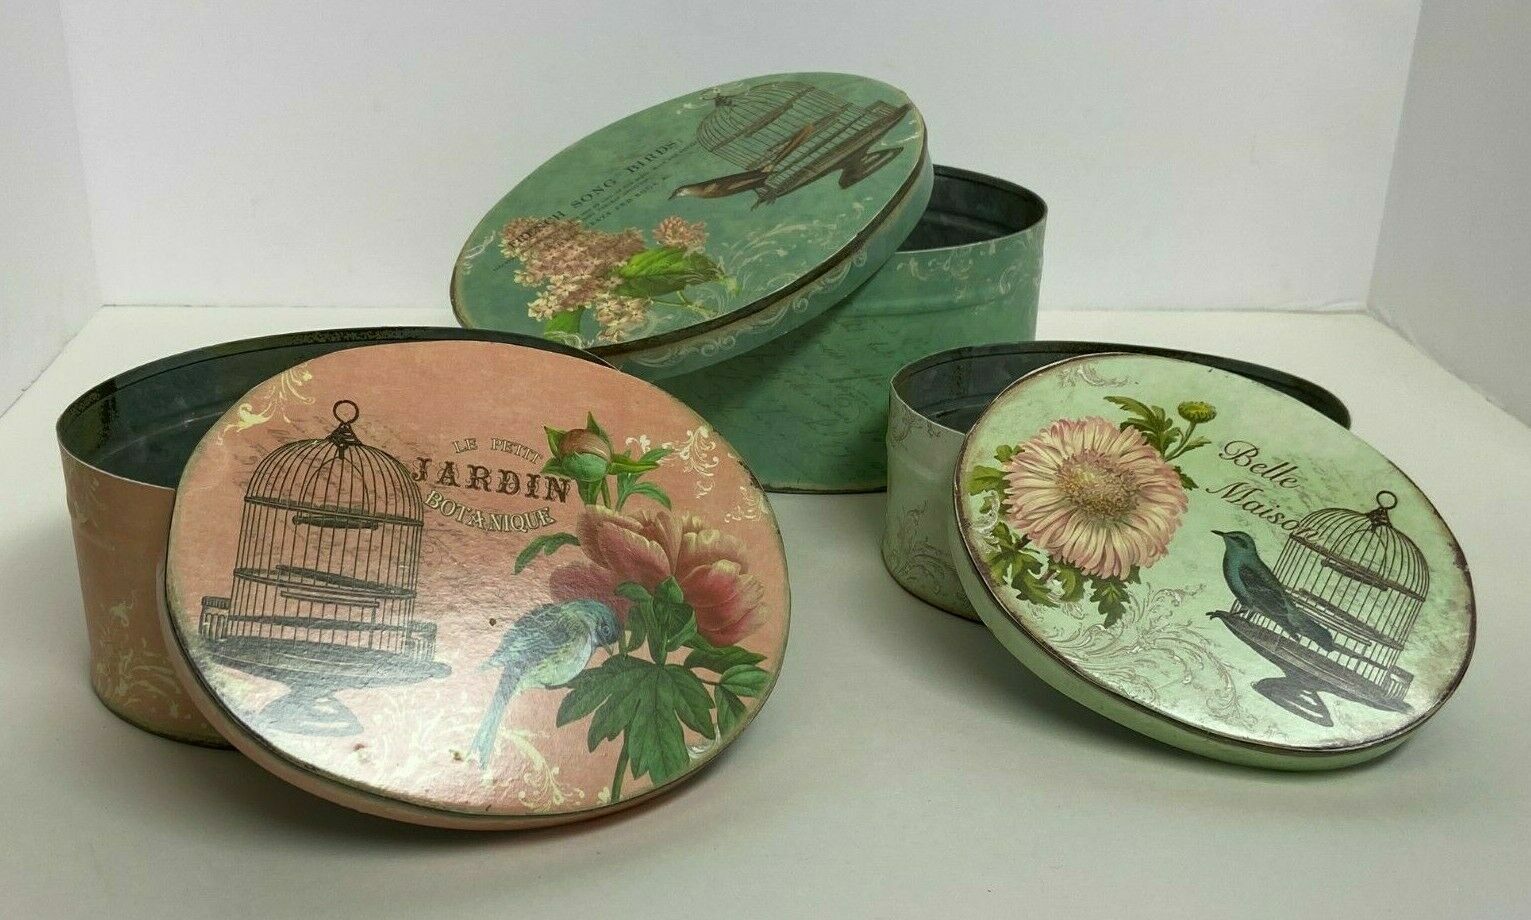 3 TINS 'FRENCH SONG BIRDS' OVAL SHAPED METAL, STACK, 7.5x6x4" HOME DECOR DNR - $12.55